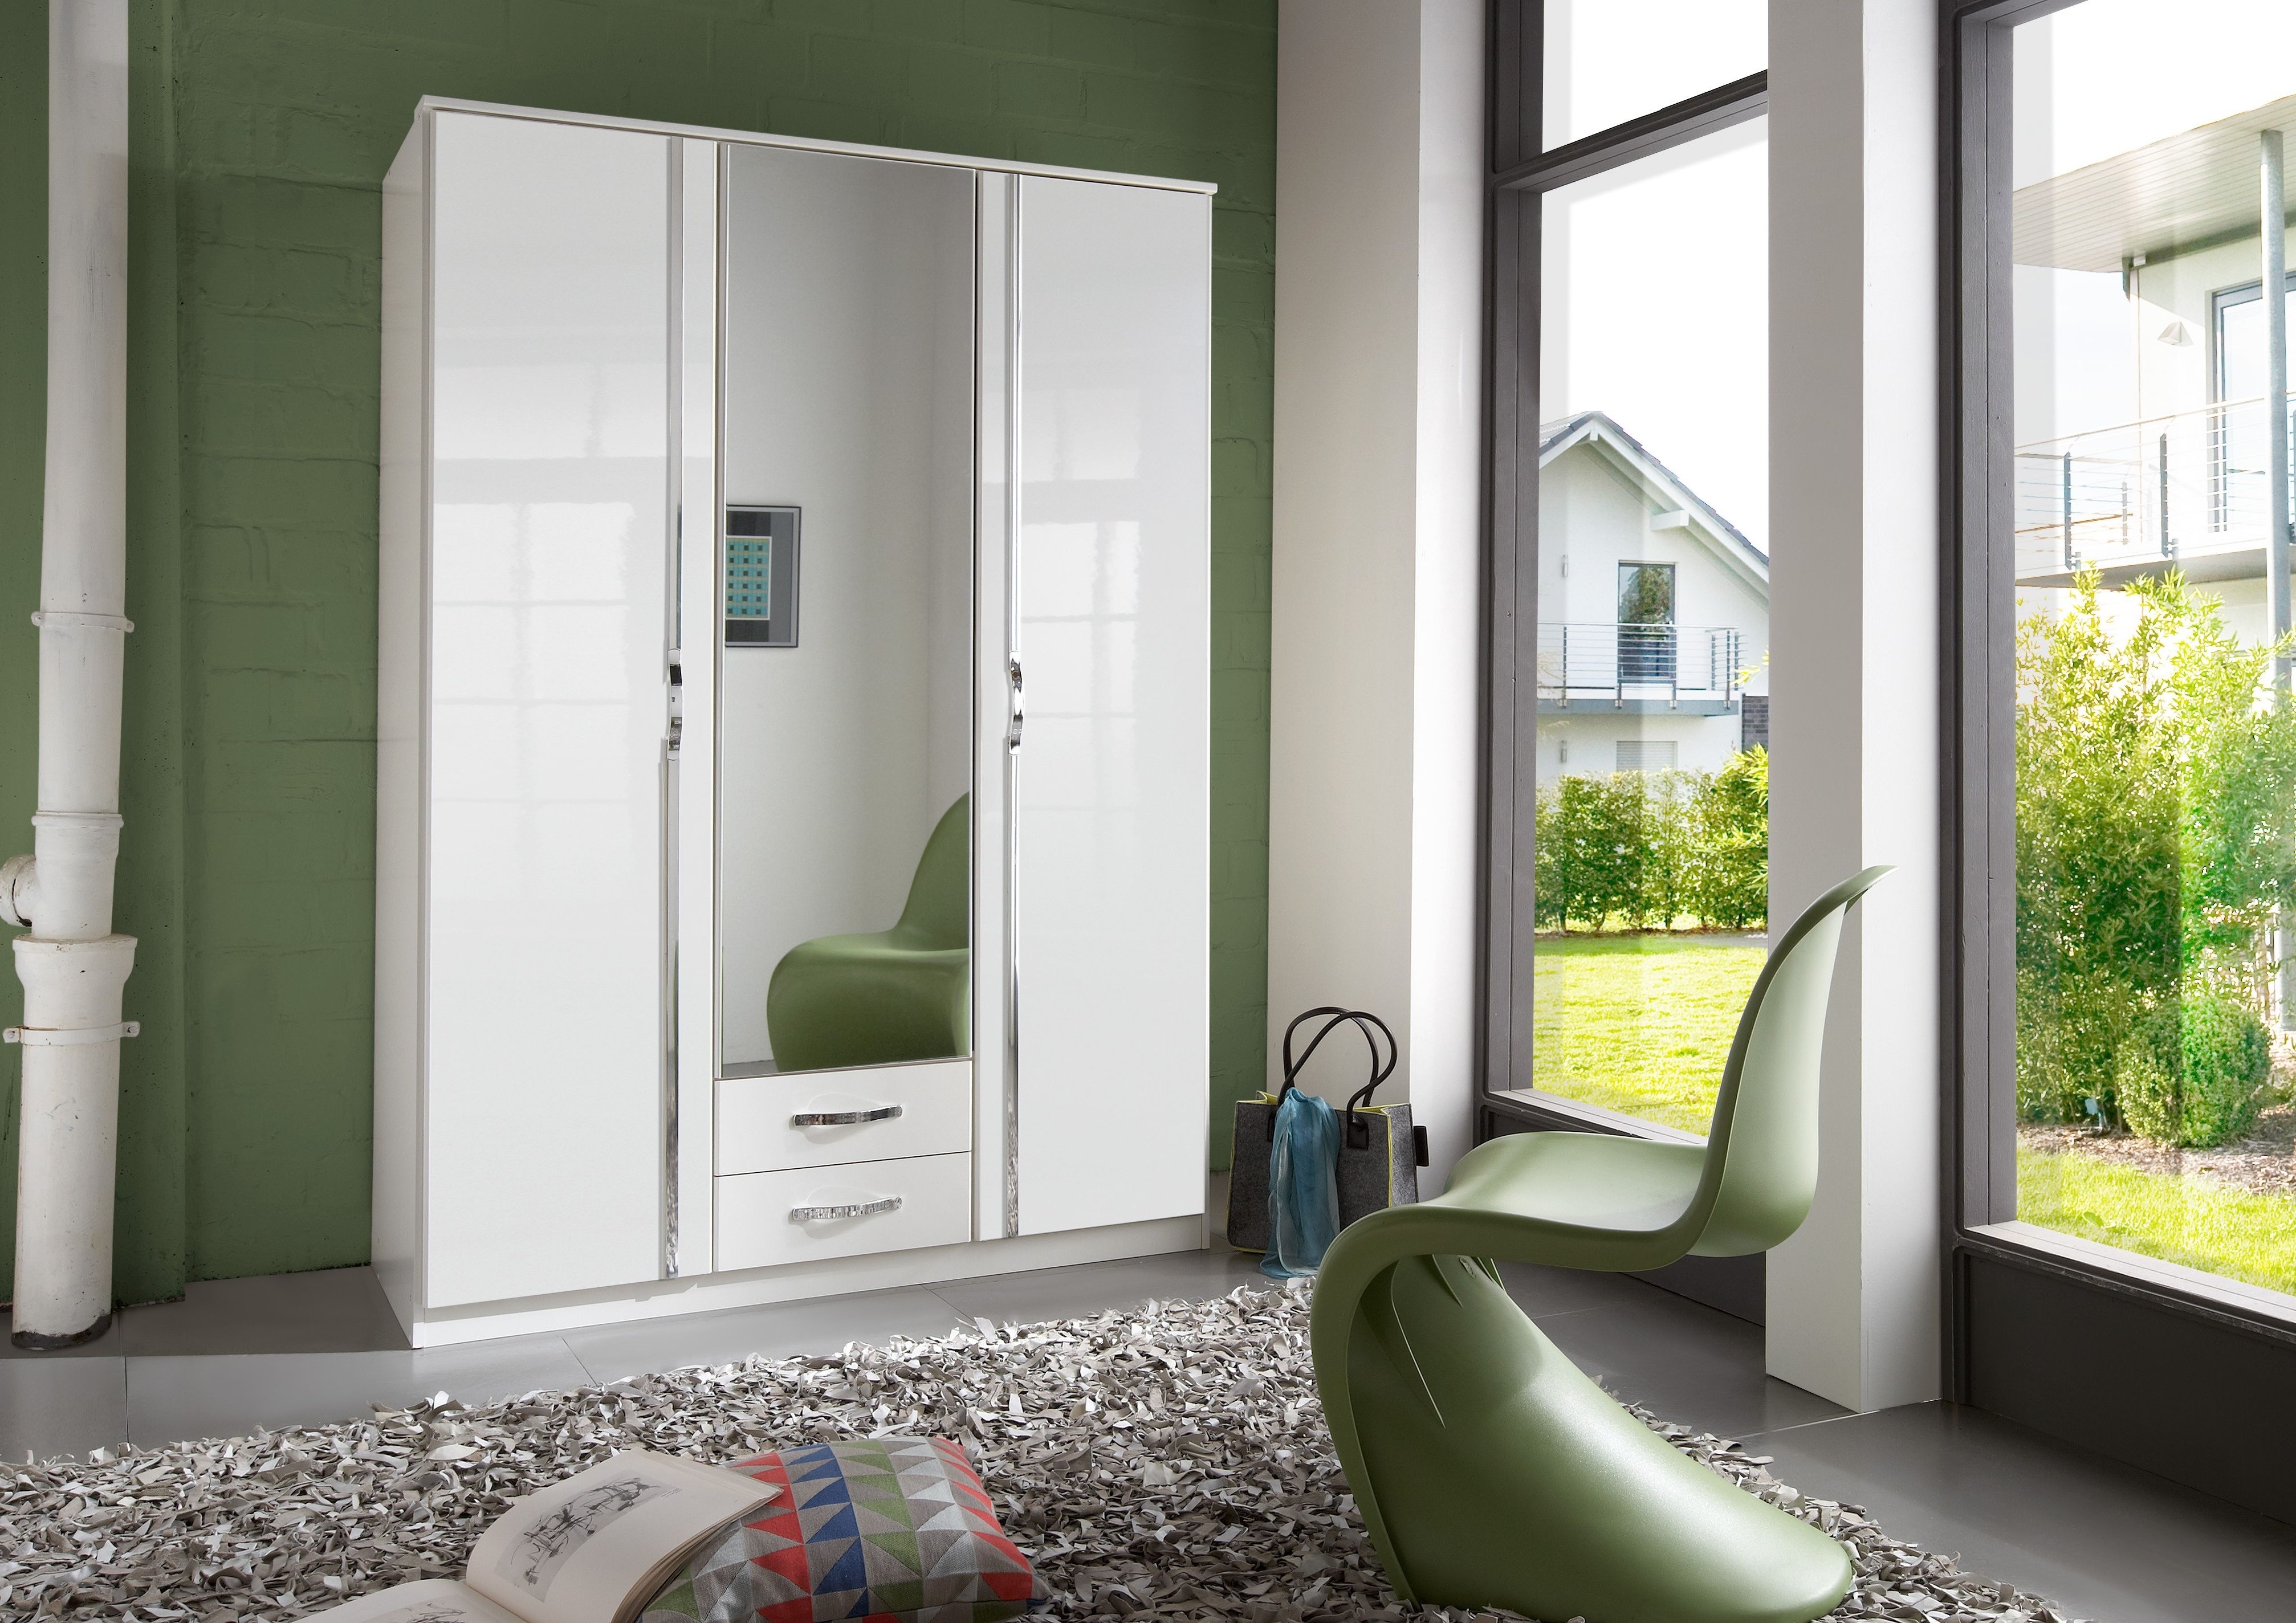 Fashionable 3 Door White Wardrobes With Drawers Throughout White Wardrobe With Mirror Amazon Drawers And Sliding Door Doors (View 5 of 15)